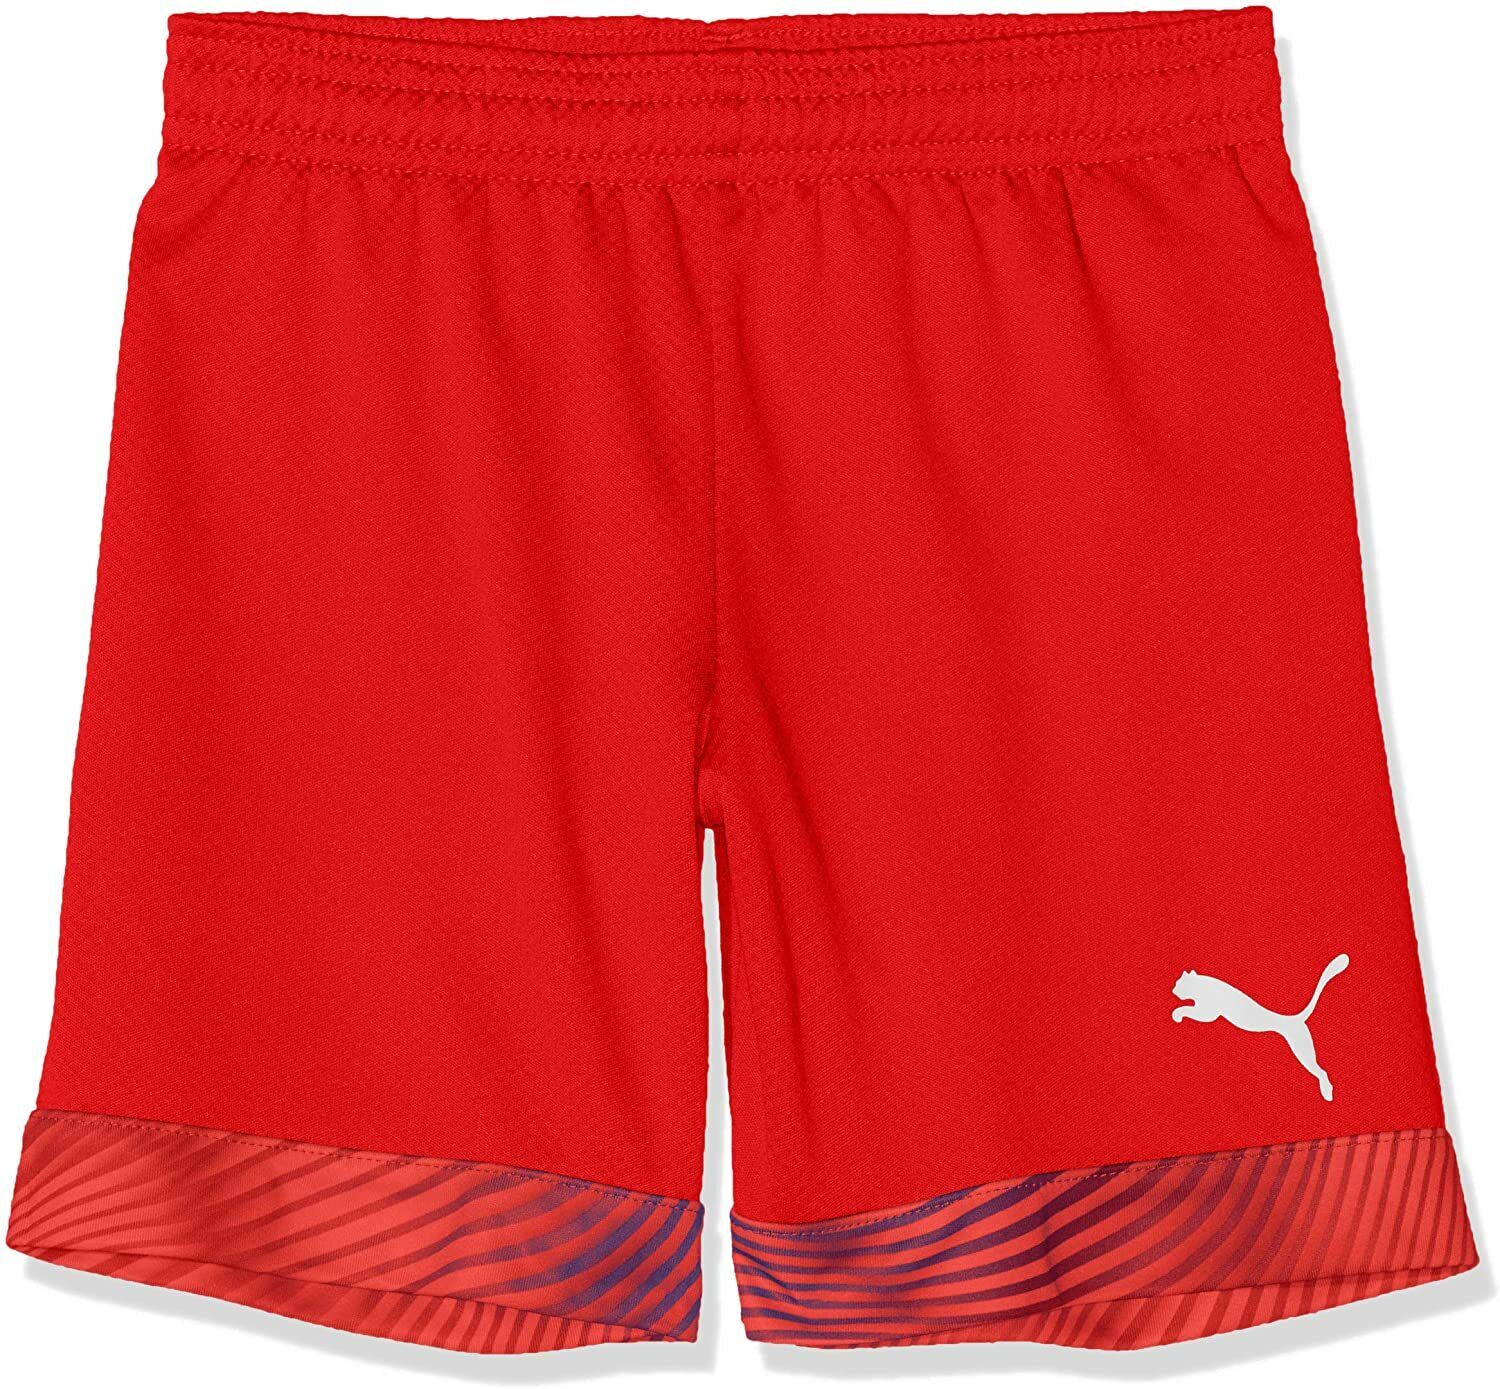 Puma Boys Cup Shorts Red White, 164